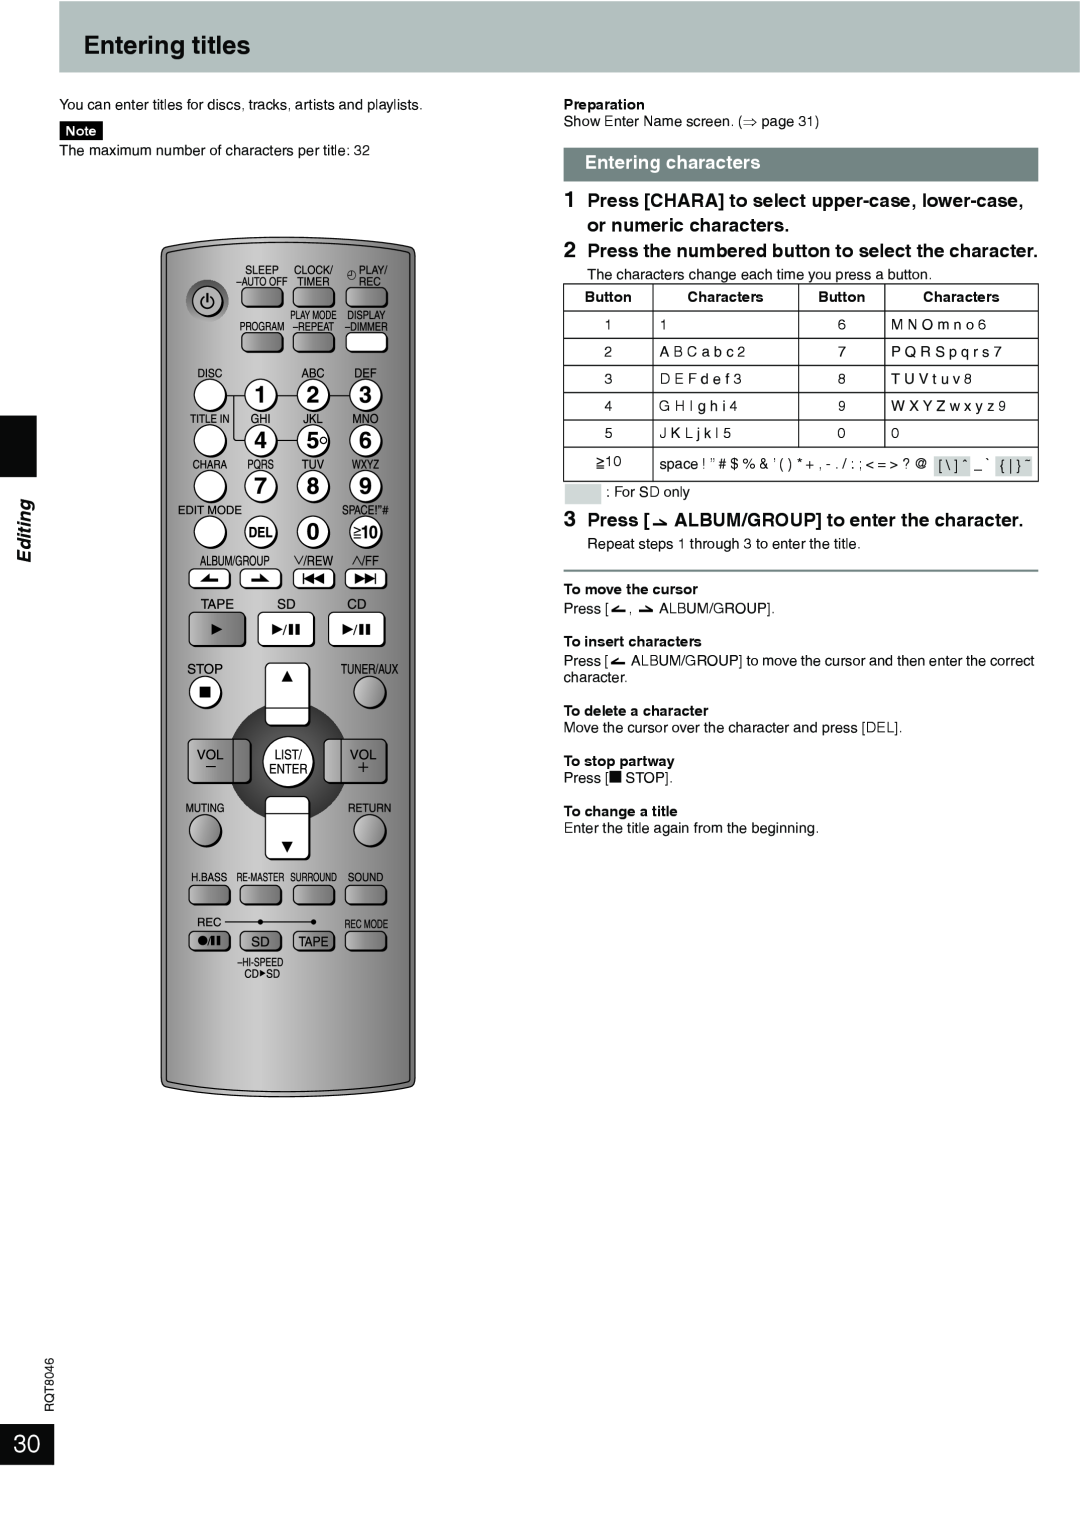 Panasonic SC-PM71SD manual Entering titles, Editing, Entering characters, 3Press ALBUM/GROUP to enter the character 